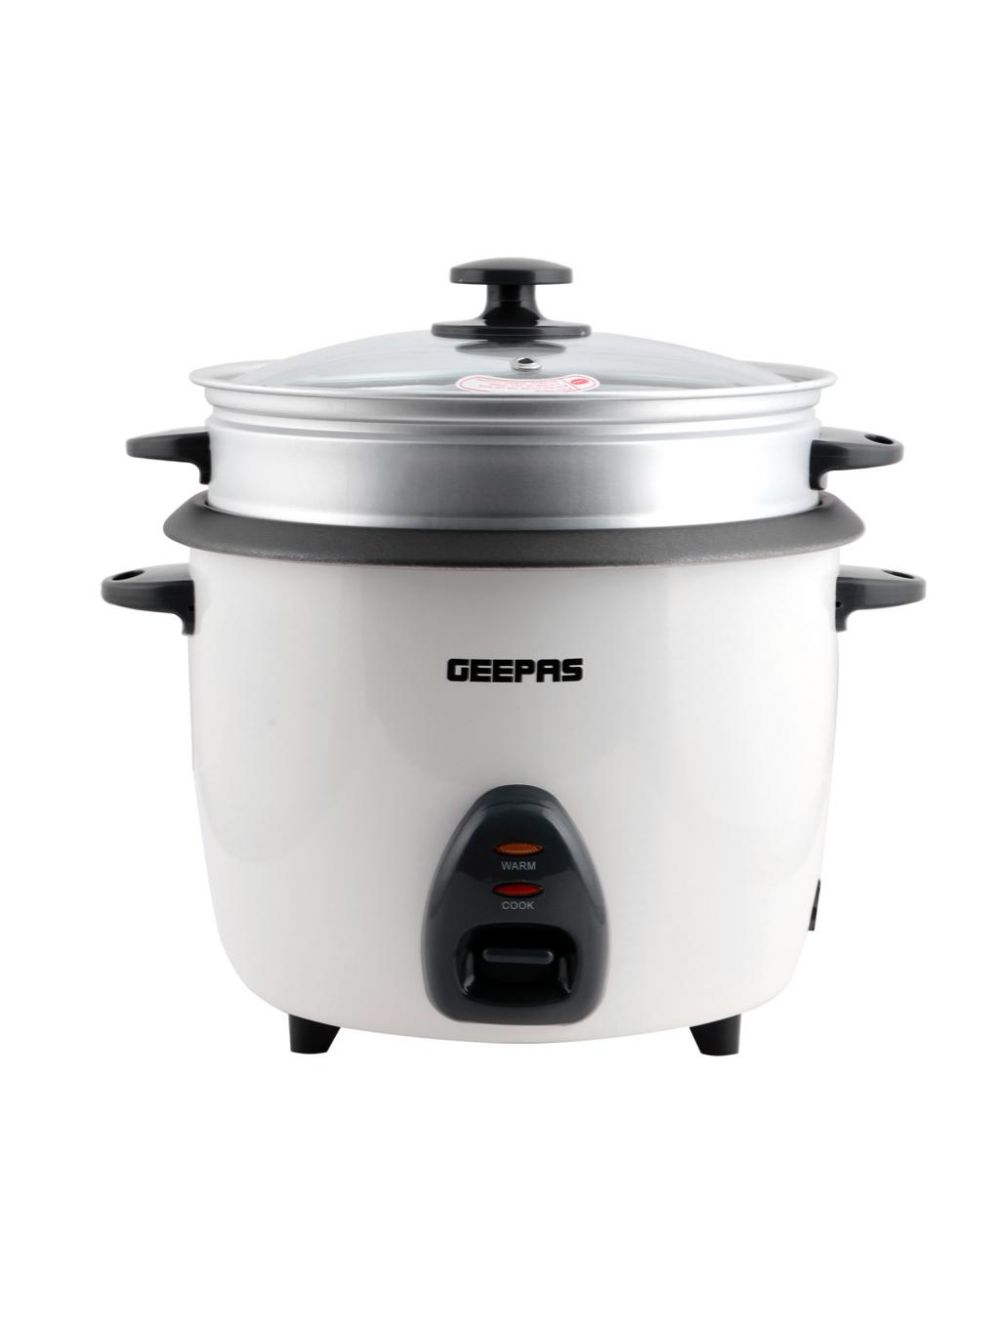 Geepas 2.2 Litres Rice Cooker, White GRC4326